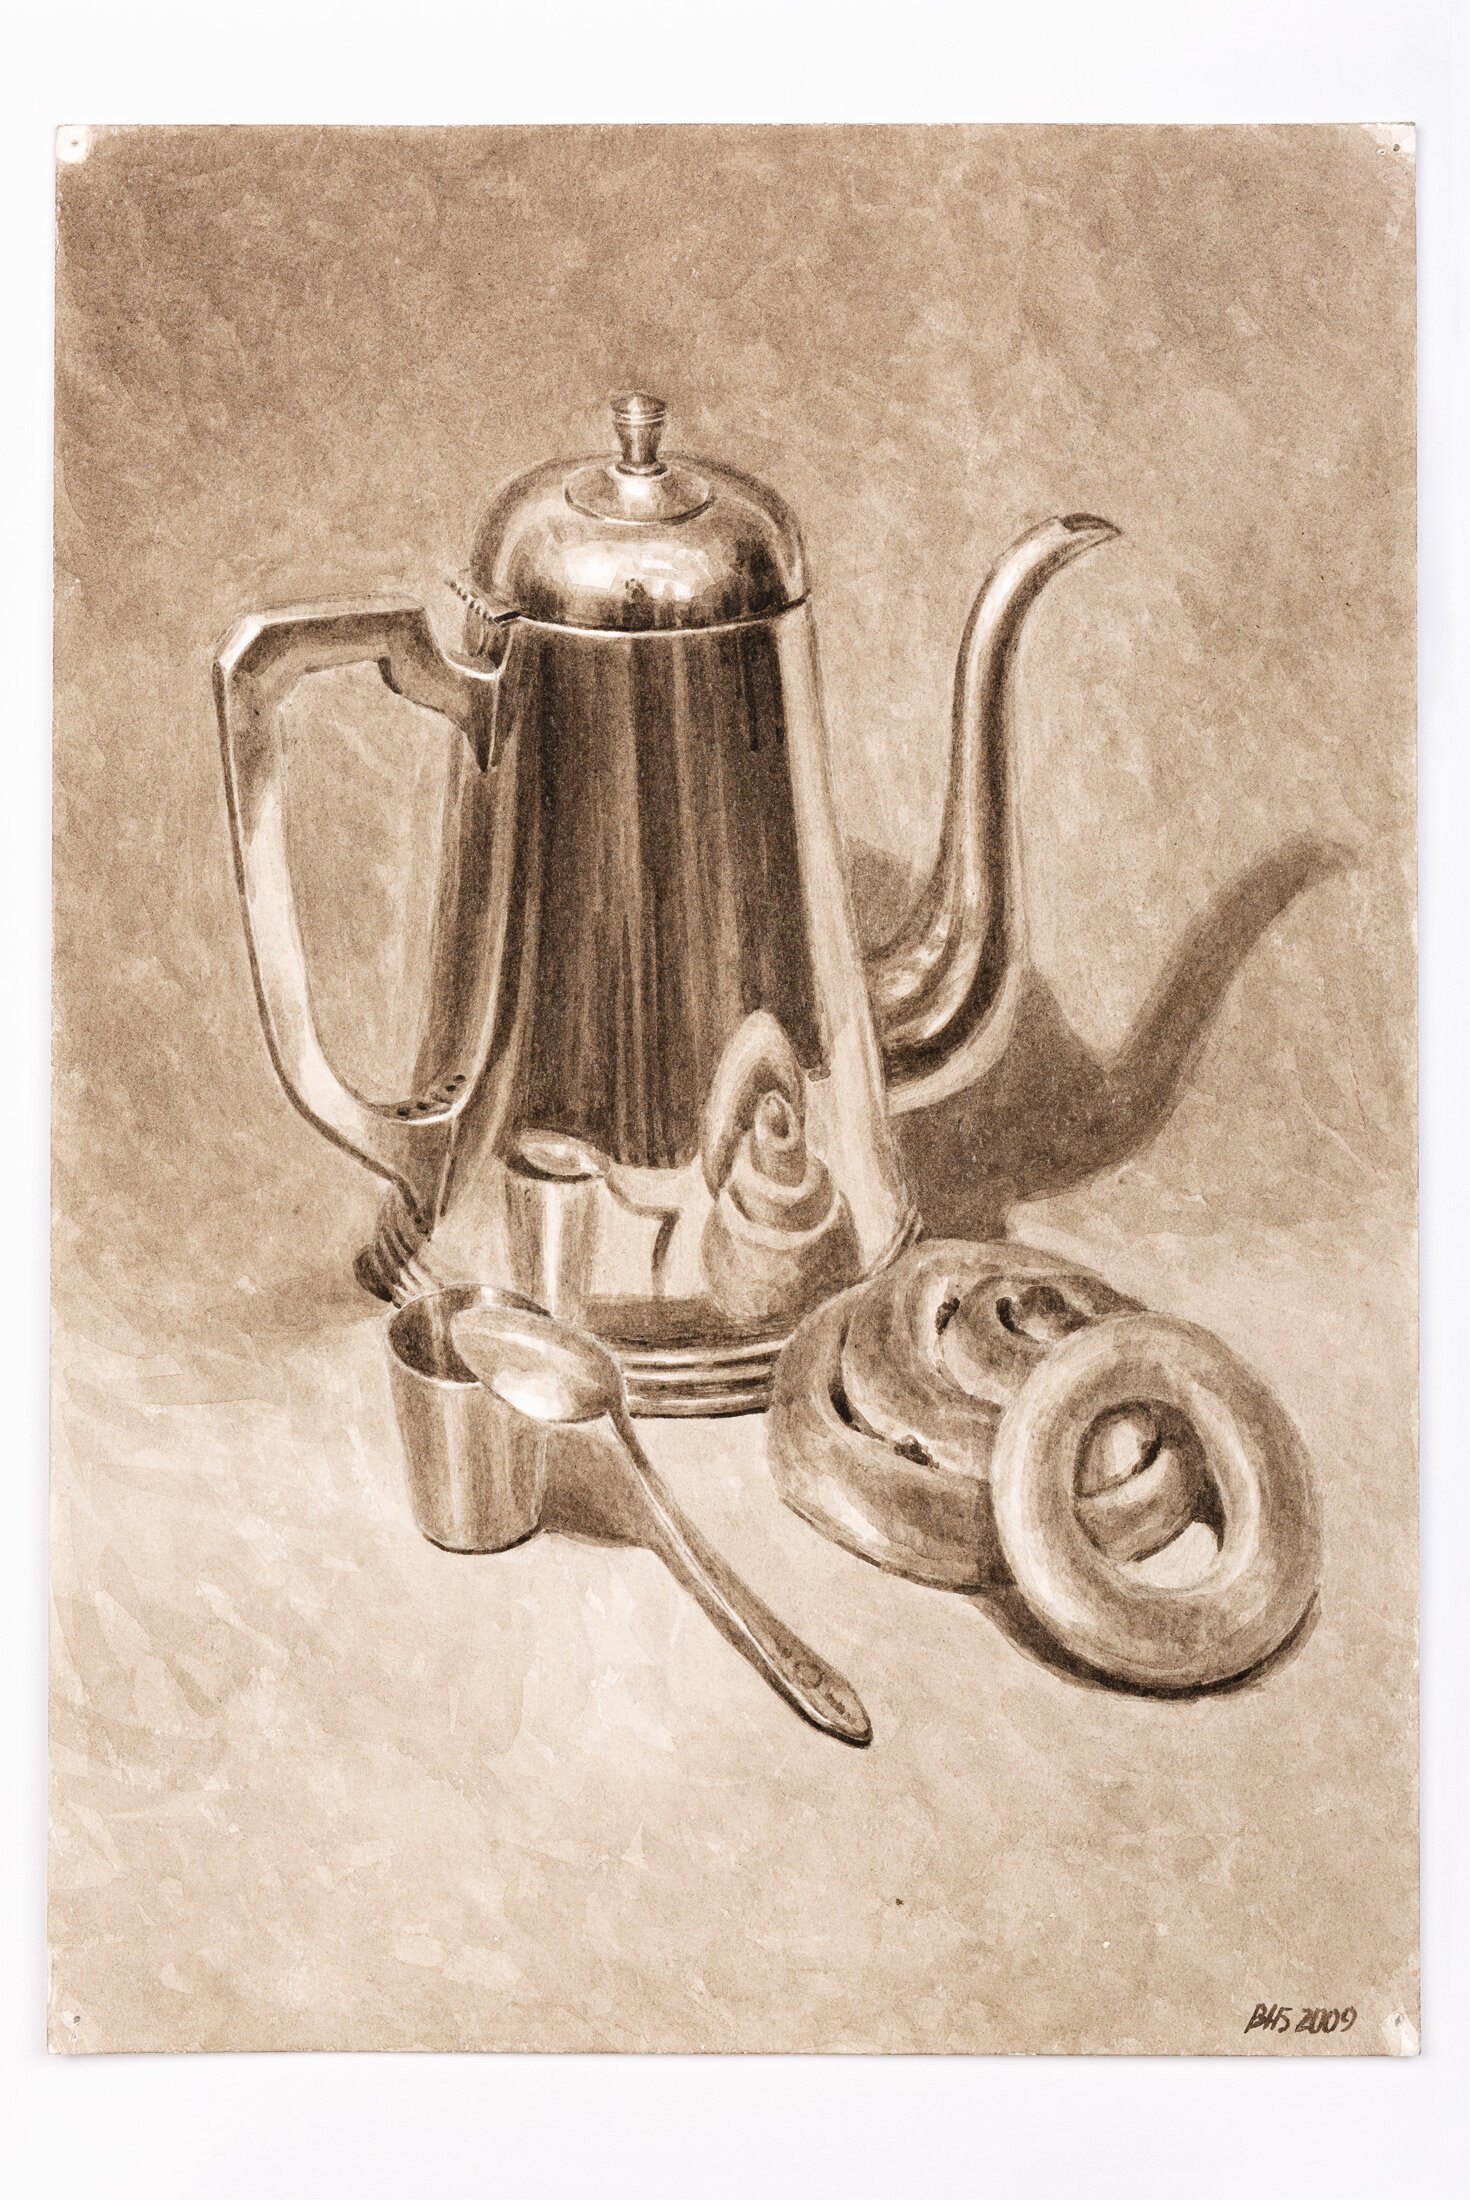 Still Life with a Coffee Pot and Pastries, 2009 - pencil and watercolor on paper